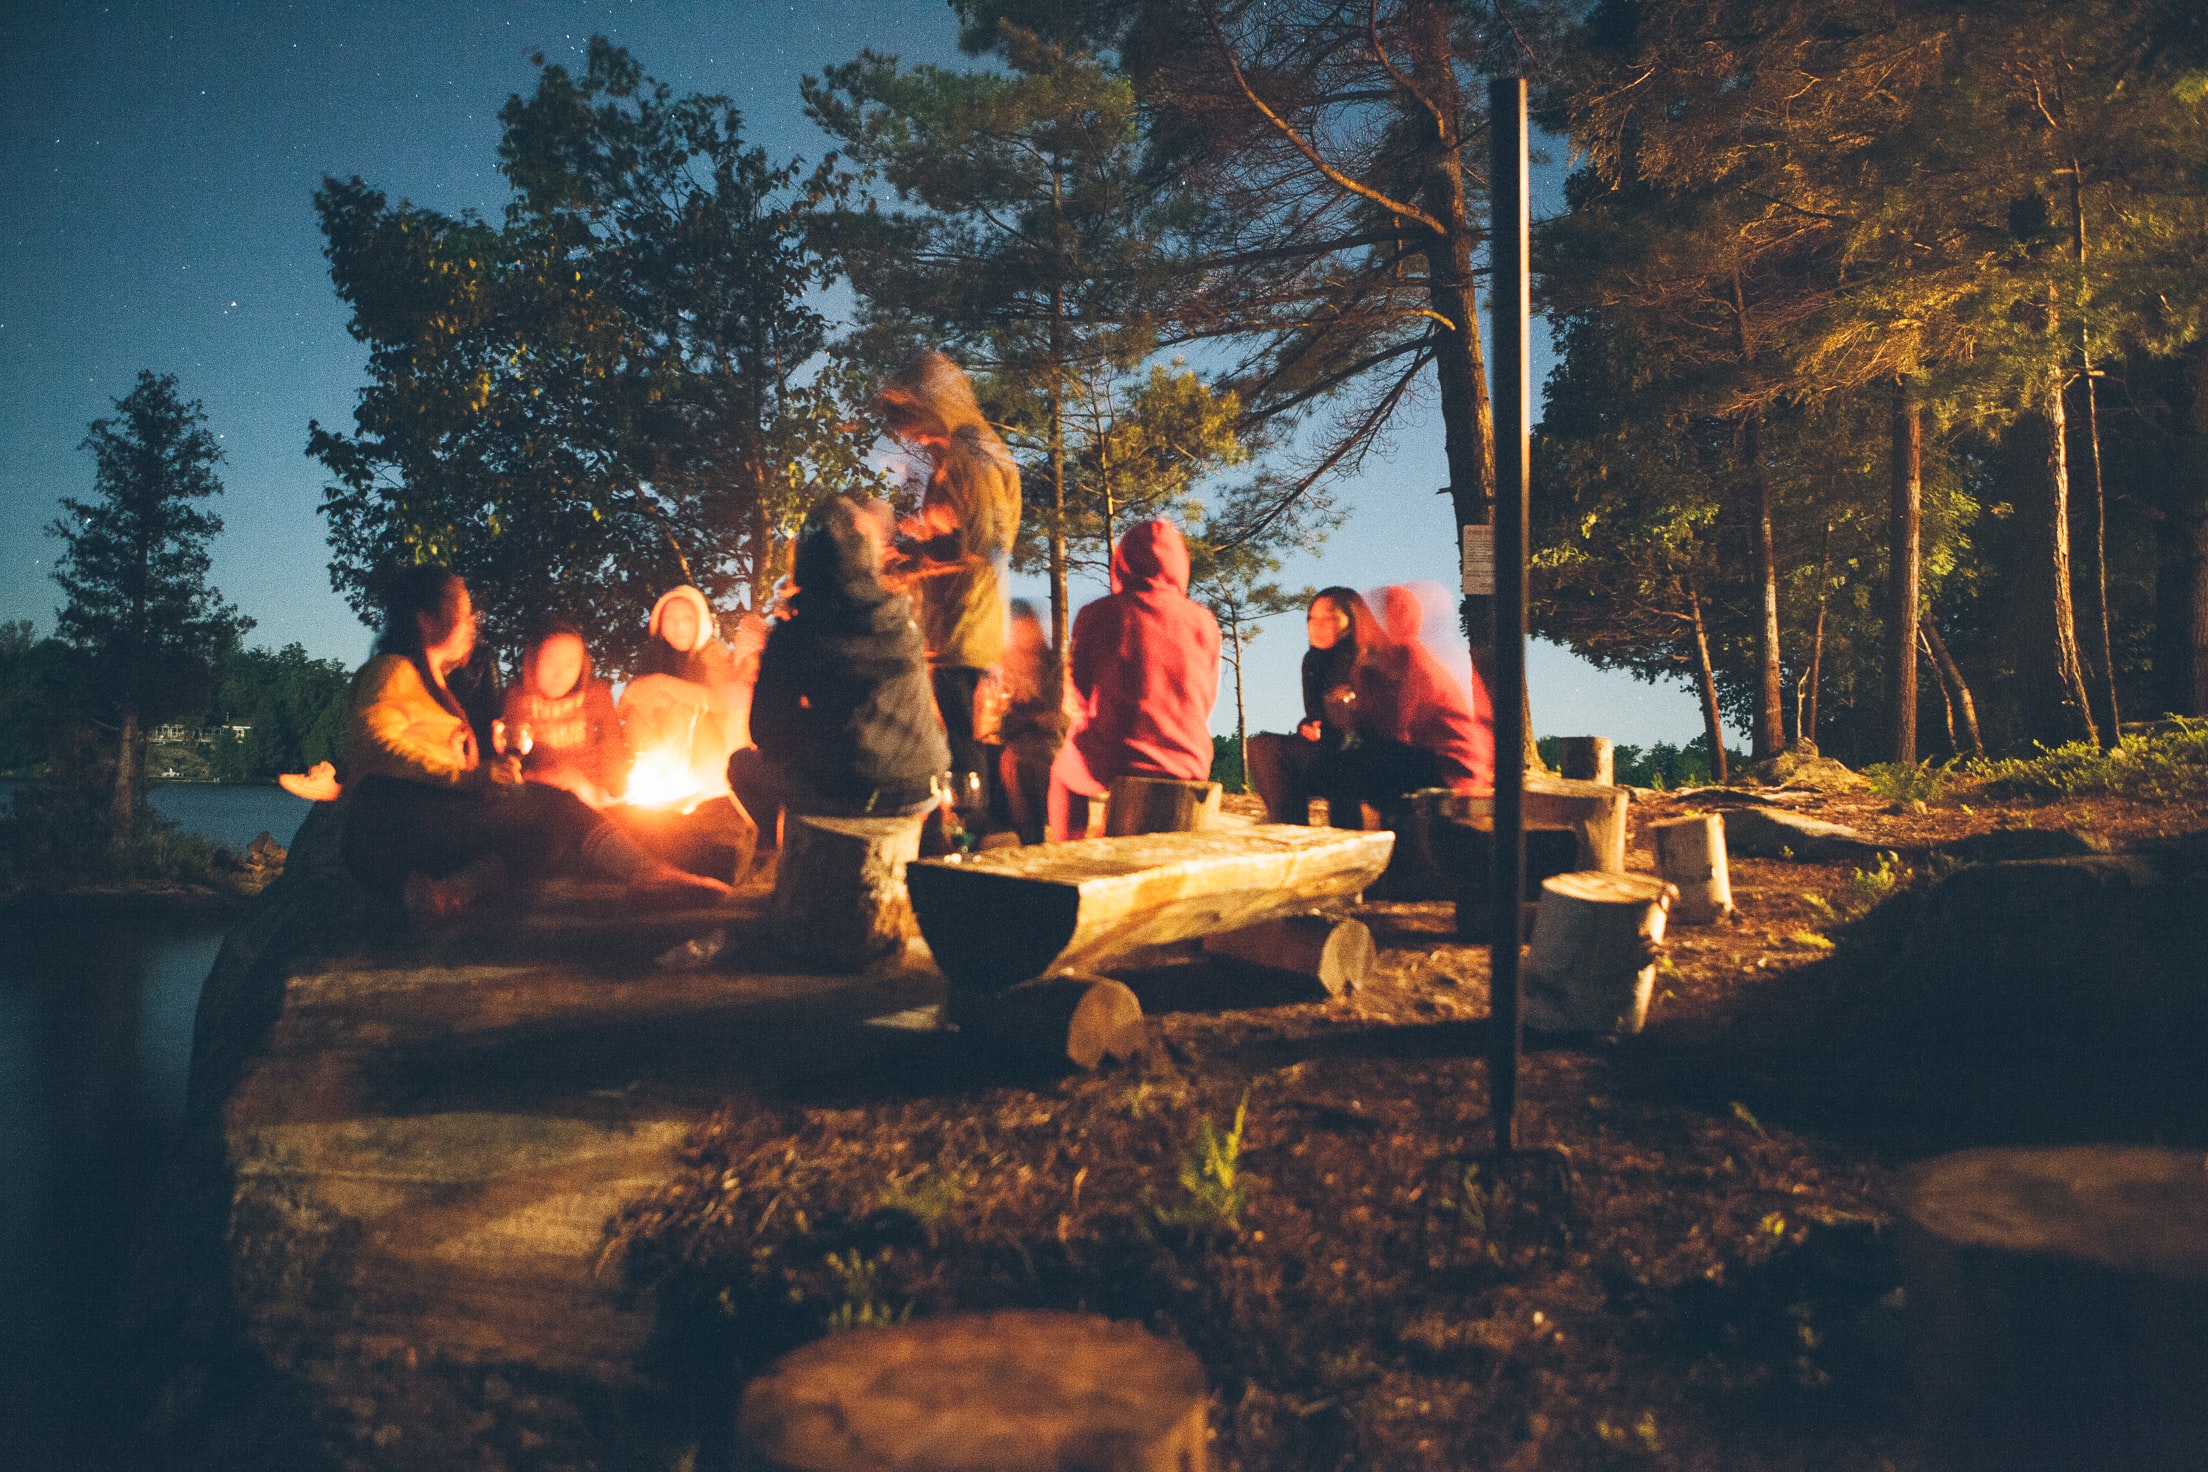 A group of people around a campfire.